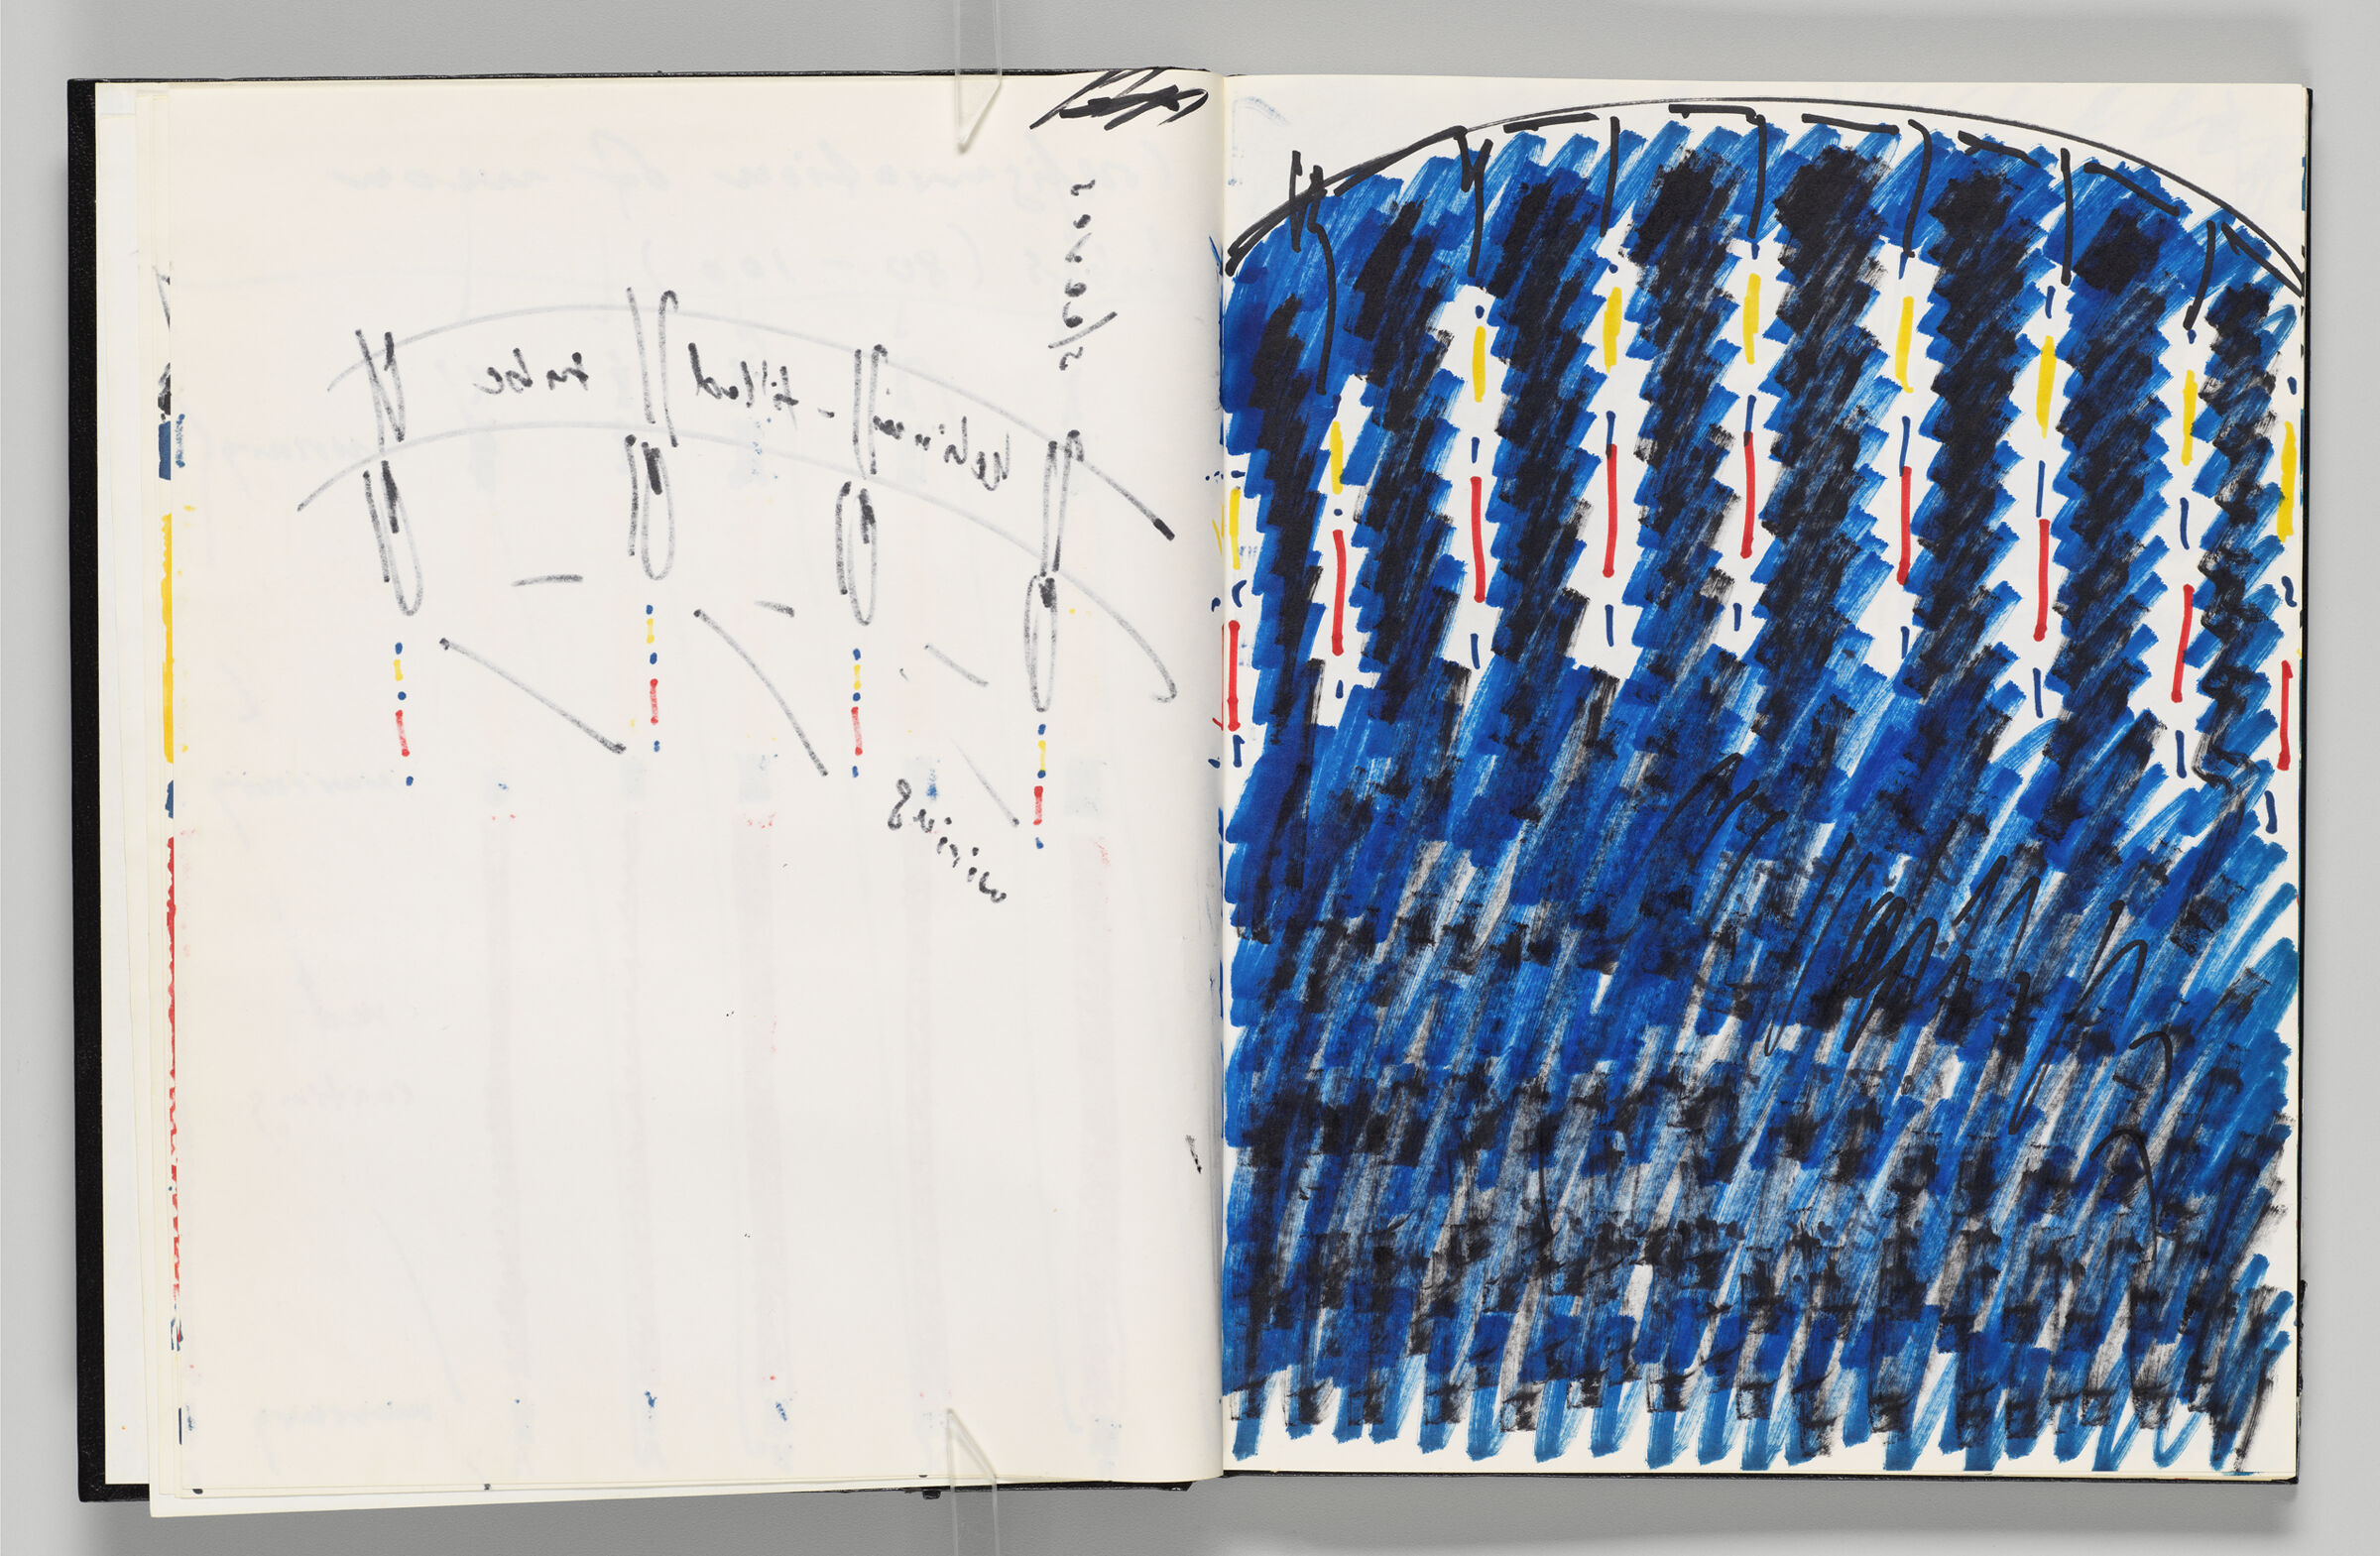 Untitled (Bleed-Through Of Previous Page, Left Page); Untitled (Neon Rainbow, Right Page)